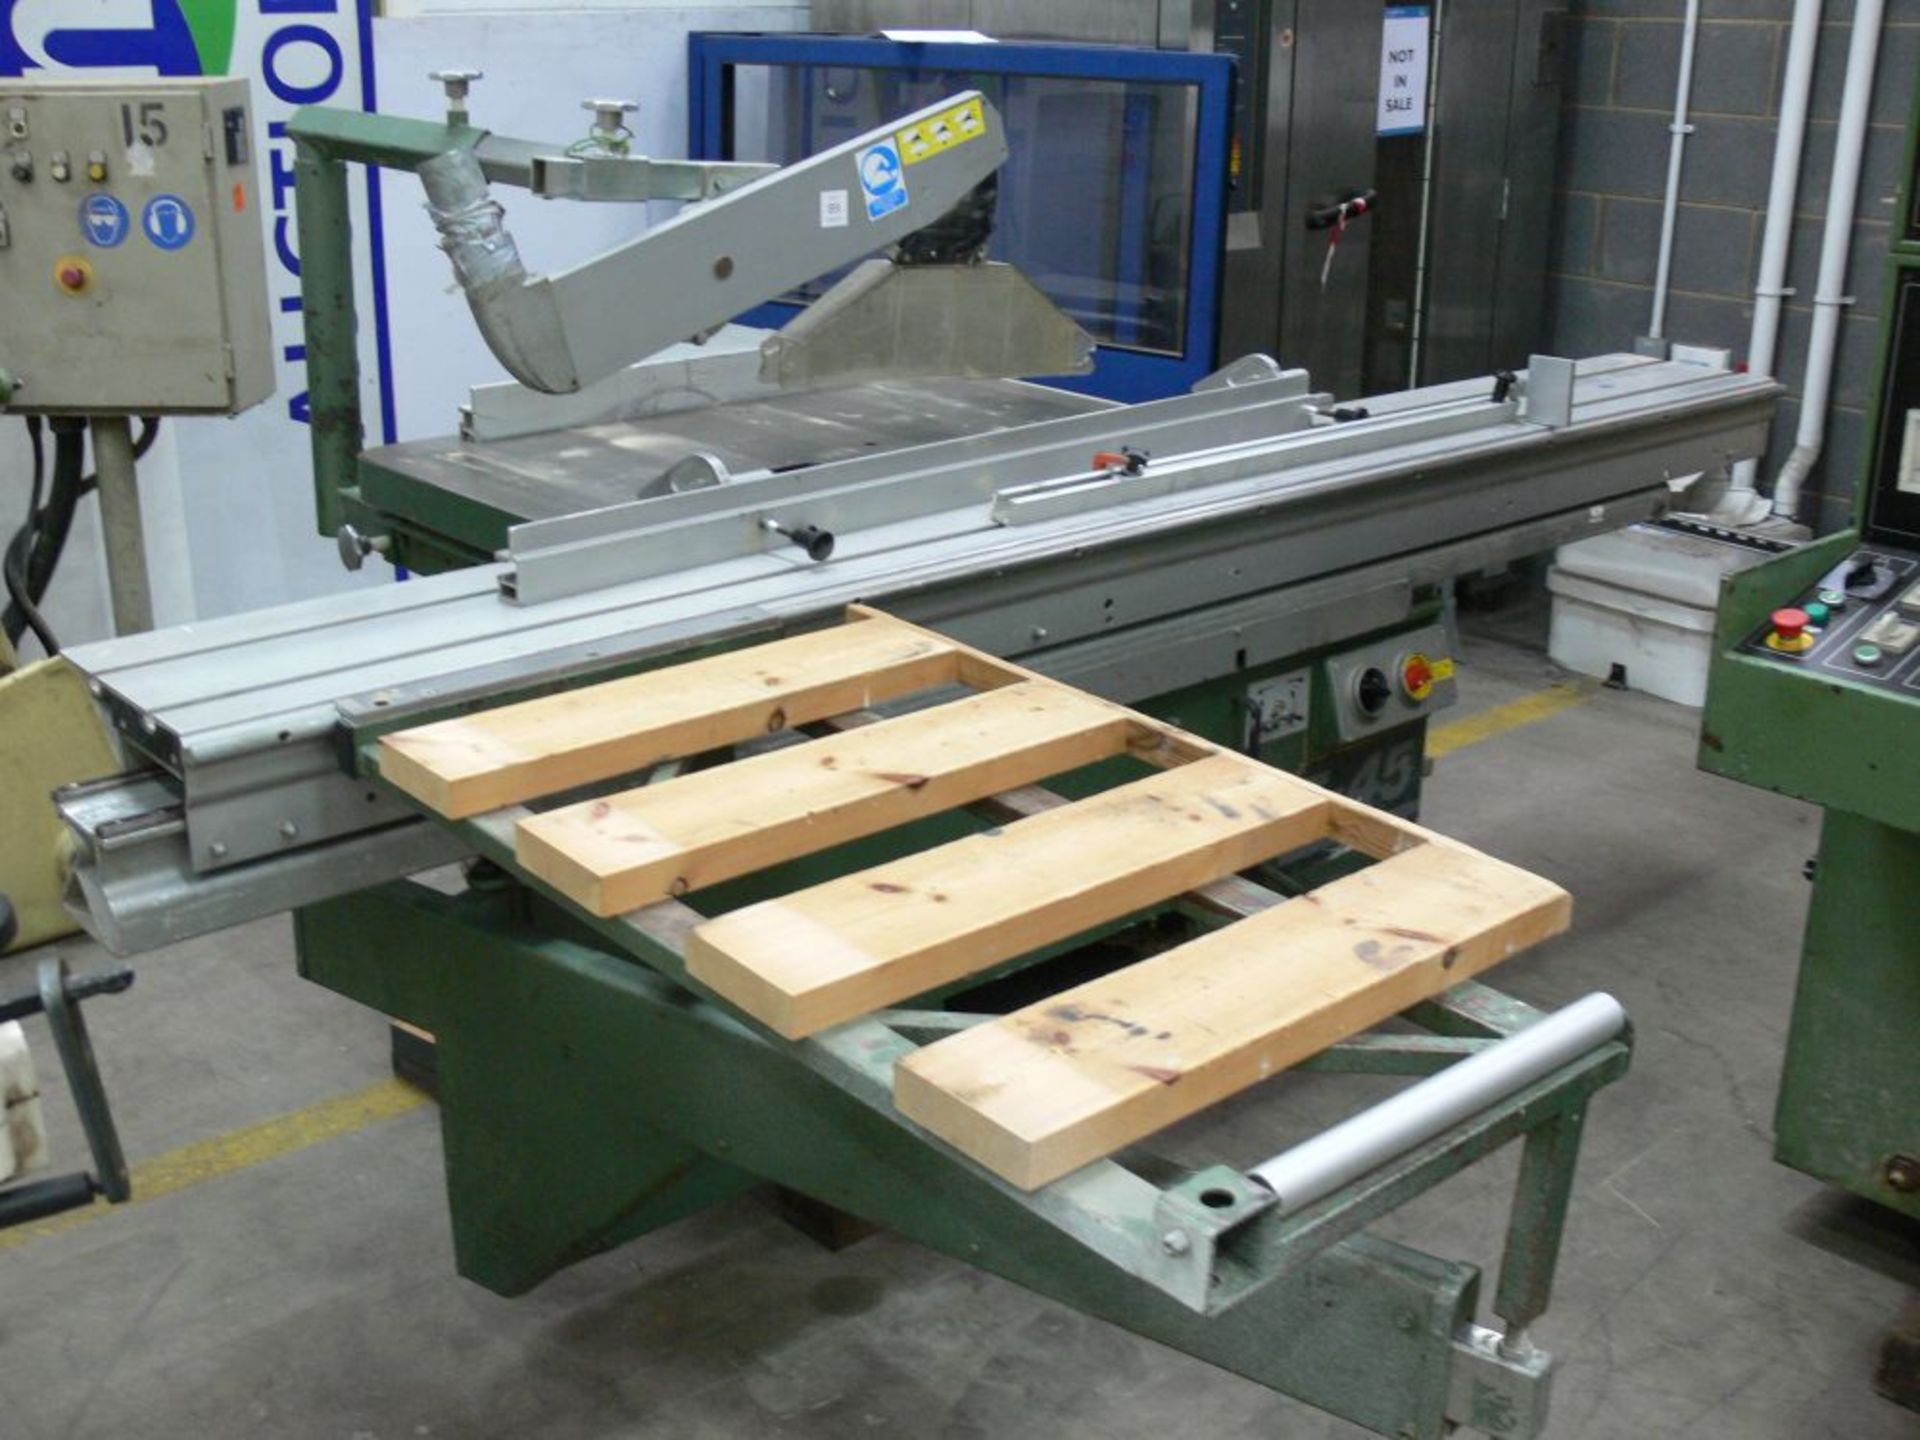 * An Altendorf F45 Panel Saw. 3450 x 2100mm. Machine No 85-3-251. Please note there is a £20 + VAT